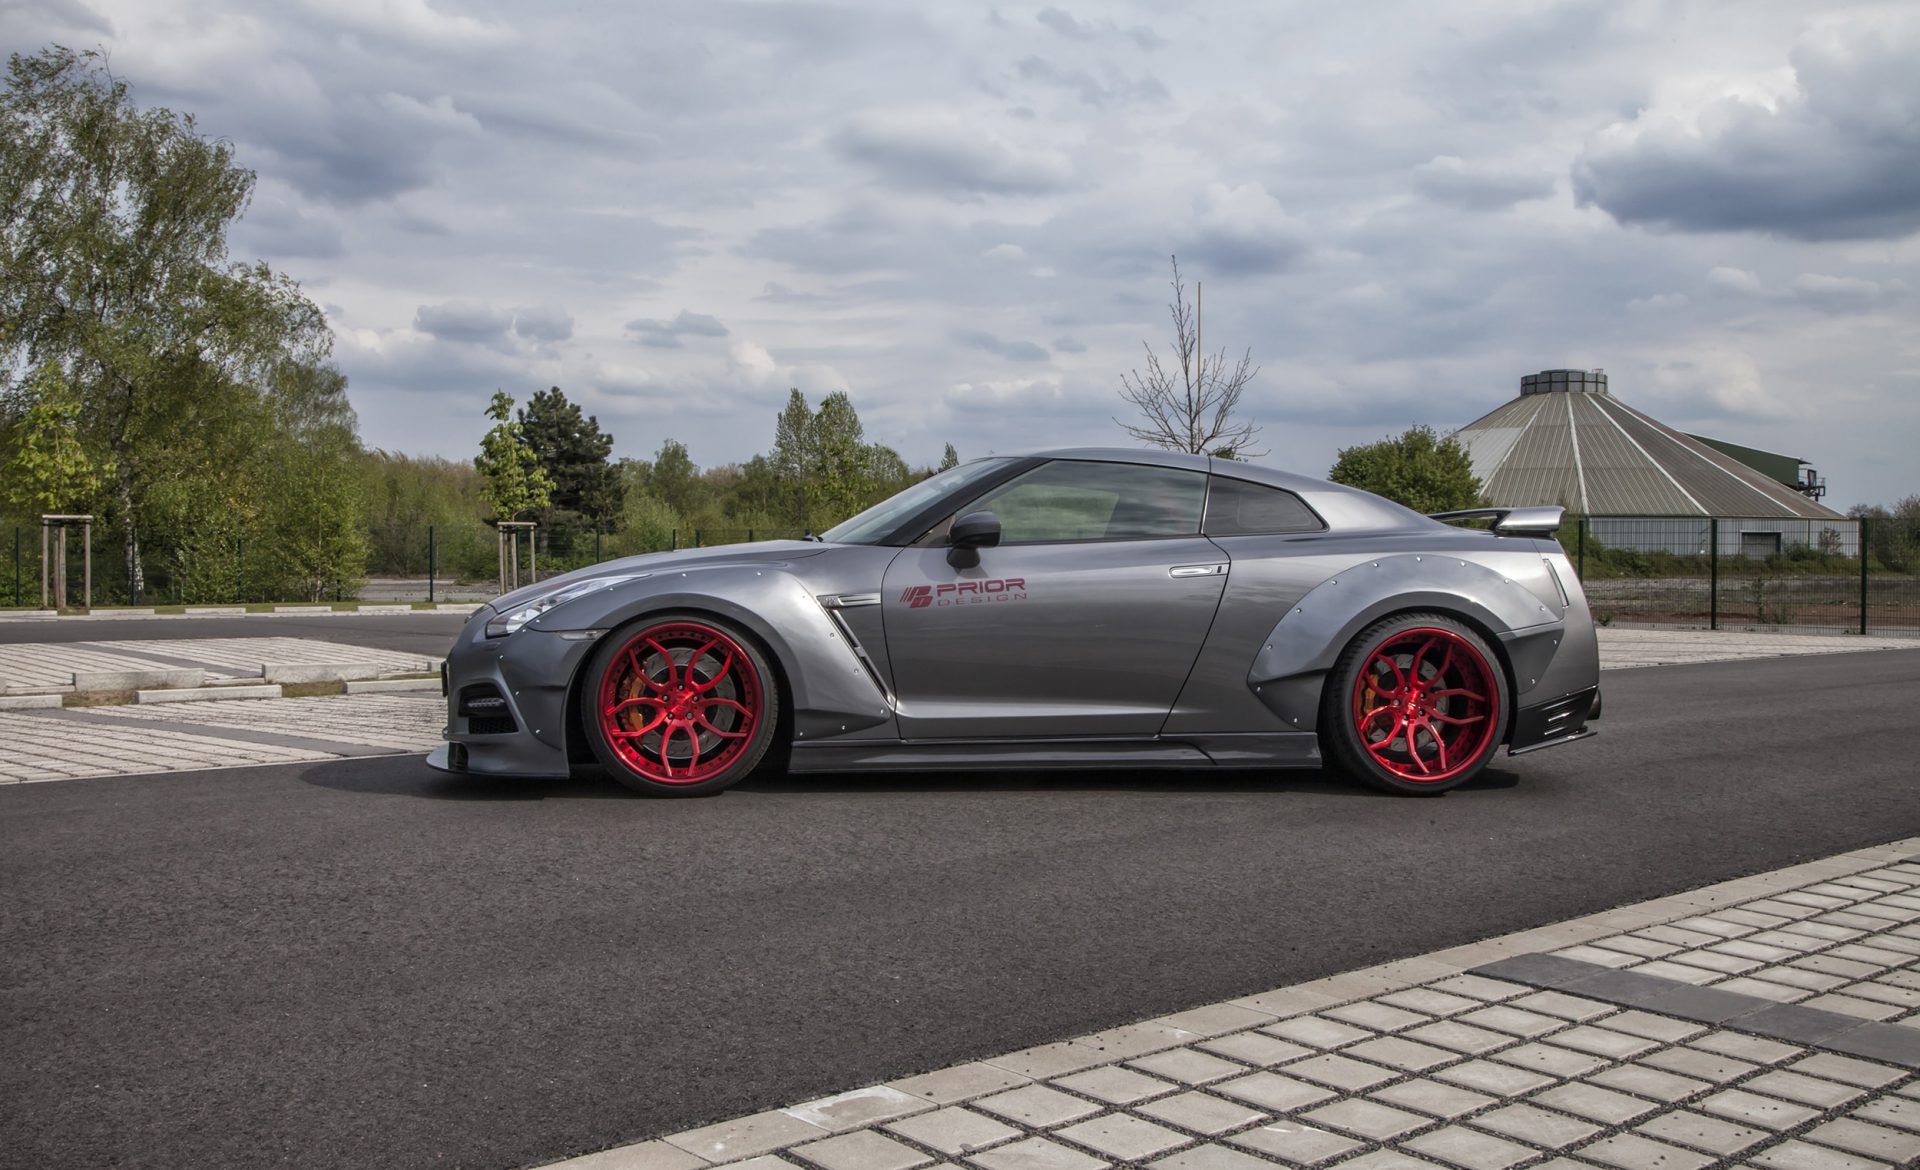 PD750 Side Skirts for Nissan GT-R [R35]